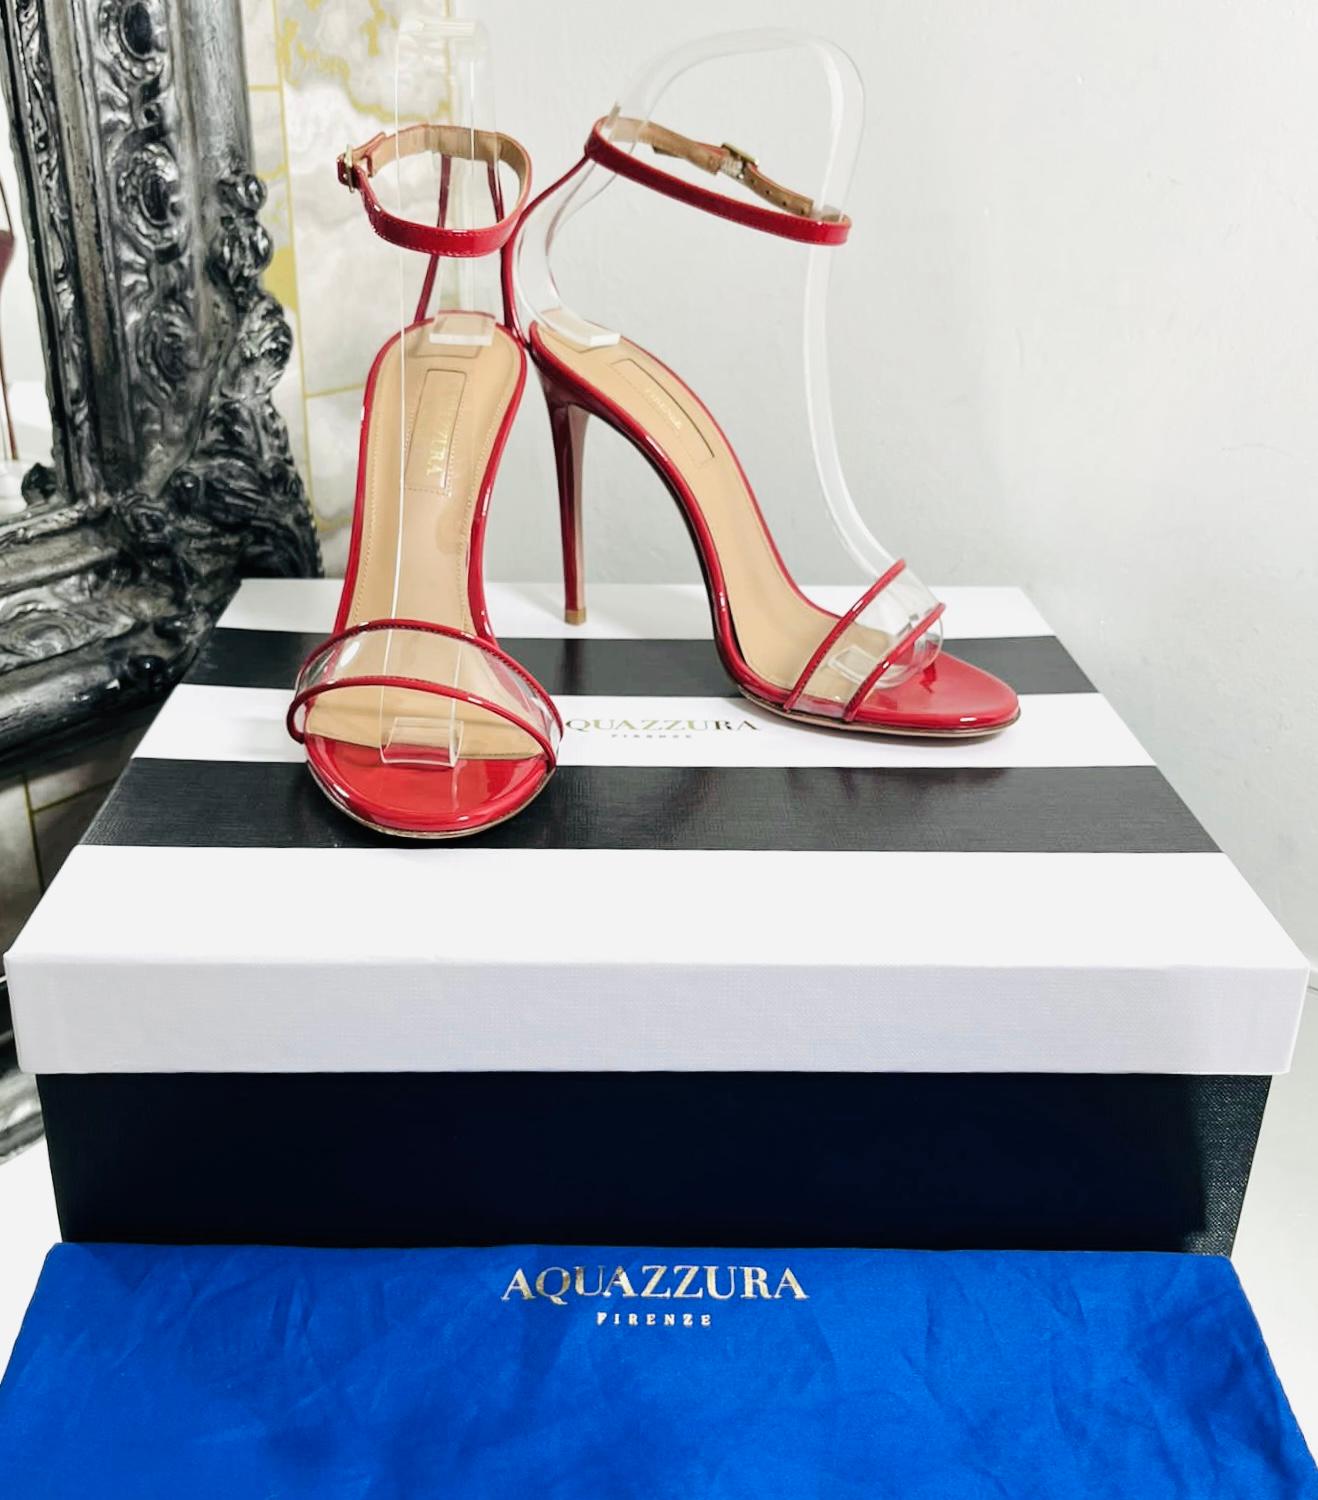 Aquazzura Patent Leather & PVC Sandals

Red heels designed with barely there straps at the toes and ankle detailed with PVC inserts. 

Featuring round toe and stiletto heel. 

Size – 35

Condition – Excellent

Composition – Patent Leather,